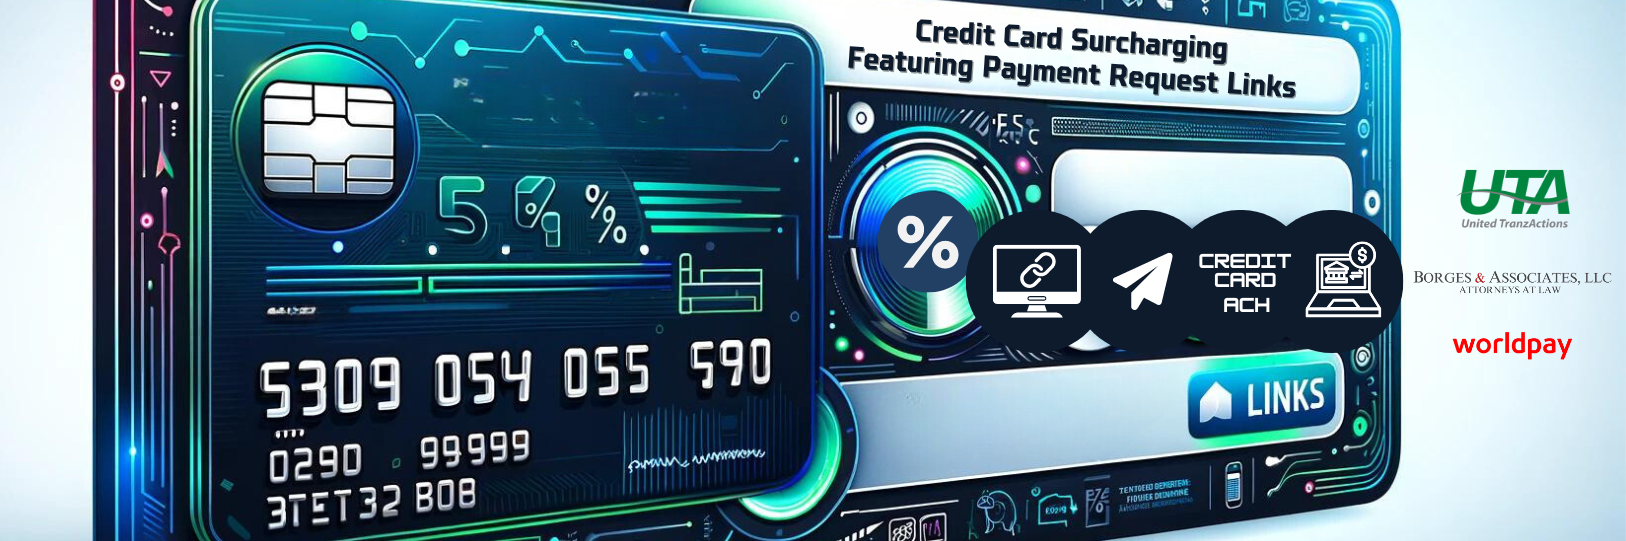 Webinar: Credit Card Surcharging Featuring Payment Request Links